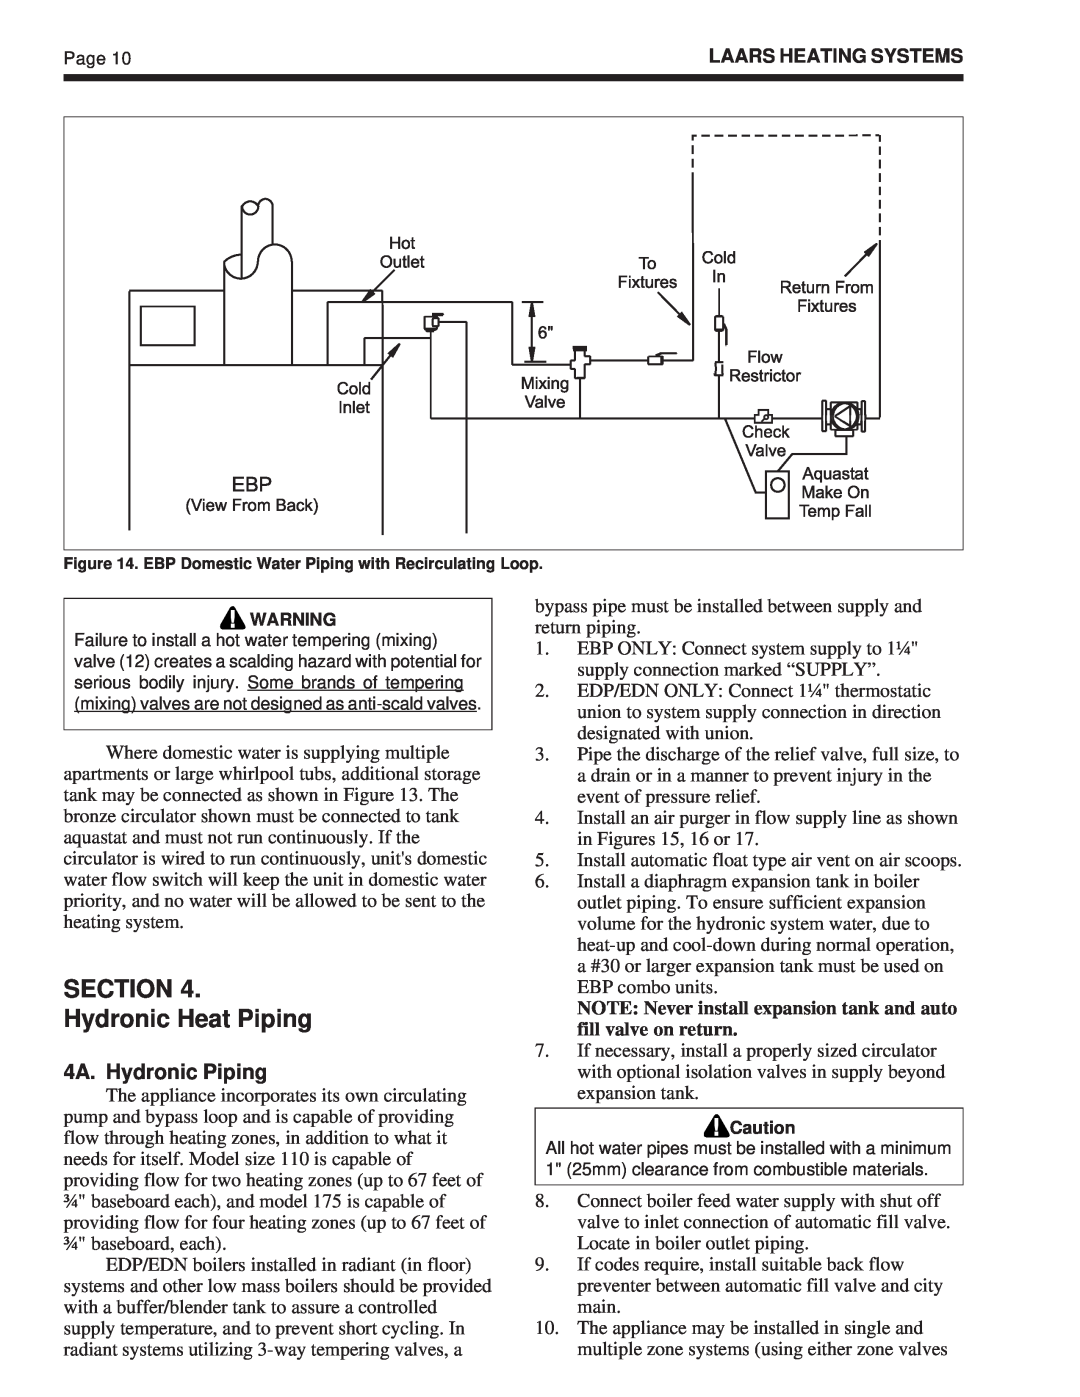 Whirlpool EDP/EDN warranty SECTION Hydronic Heat Piping, 4A. Hydronic Piping 